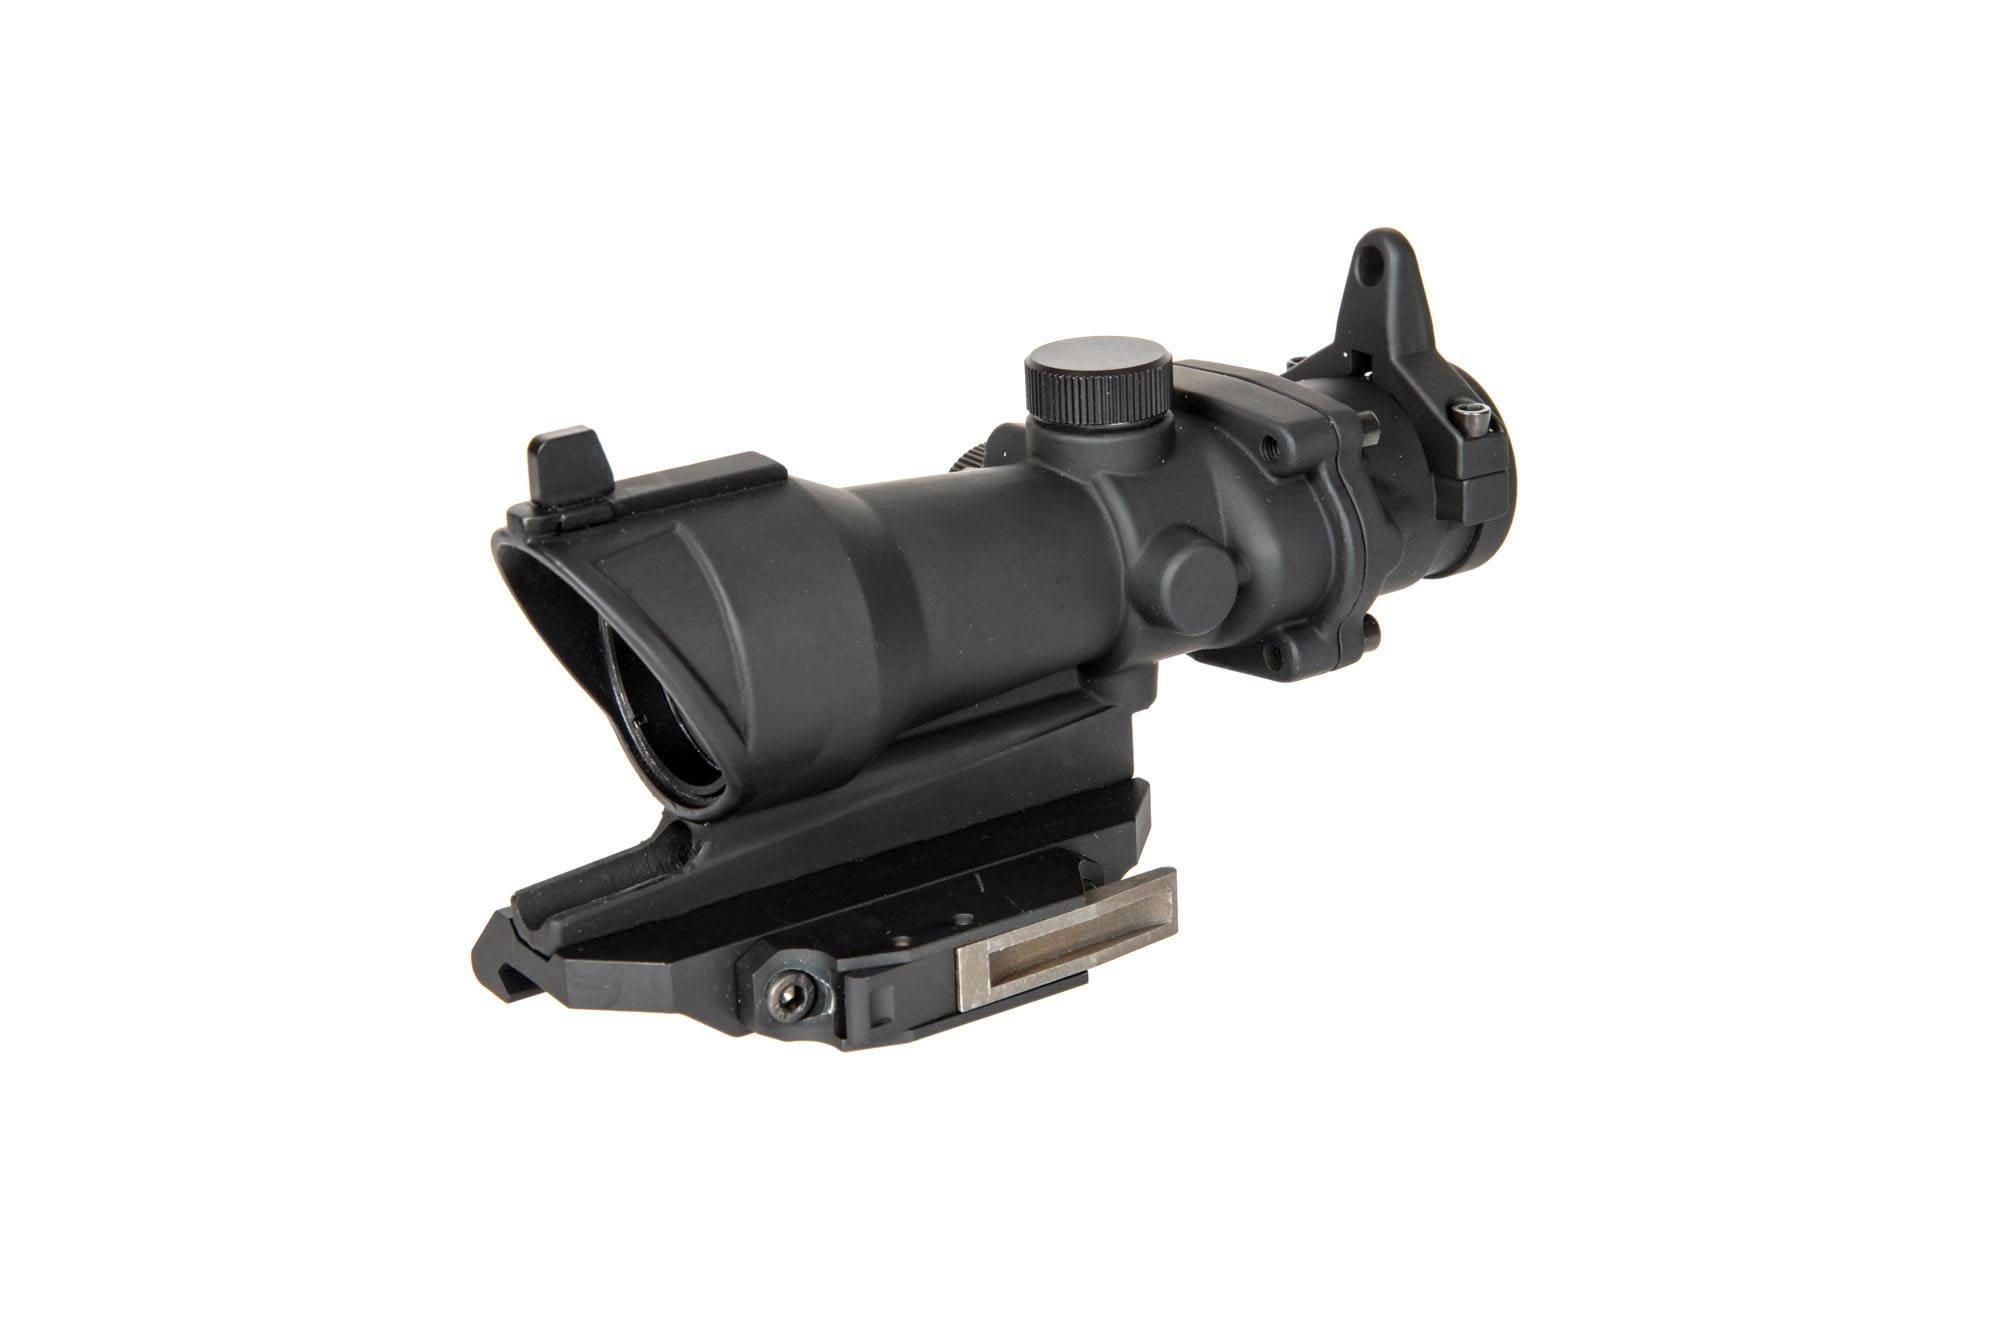 ACOG Style 4x32 Scope Replica with Killflash Cover and QD V2 Mount - Black